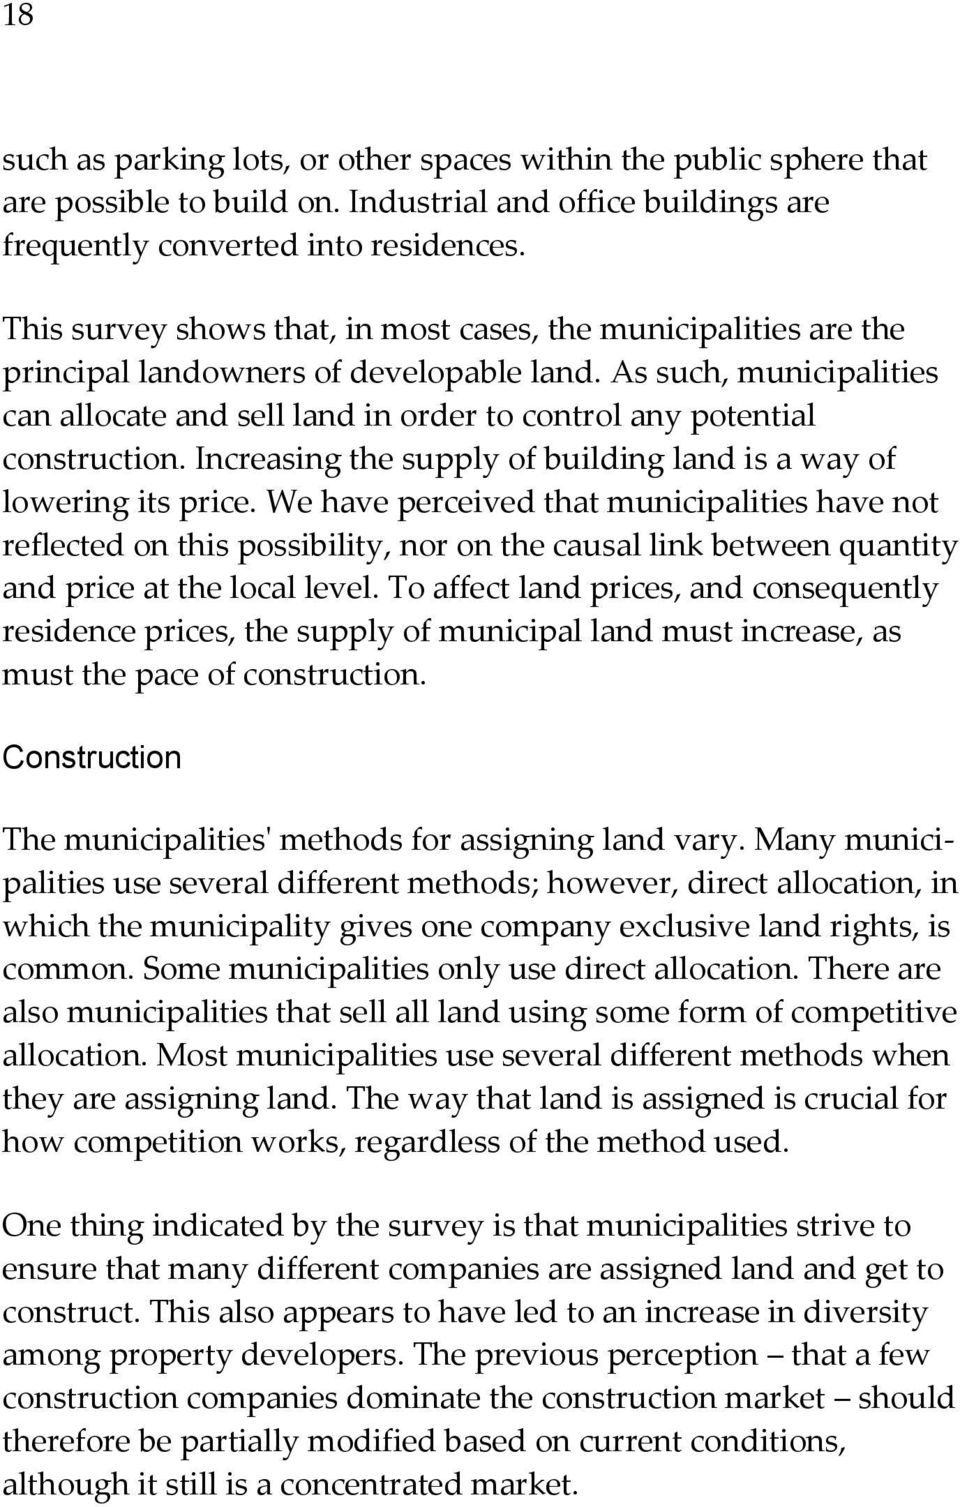 As such, municipalities can allocate and sell land in order to control any potential construction. Increasing the supply of building land is a way of lowering its price.